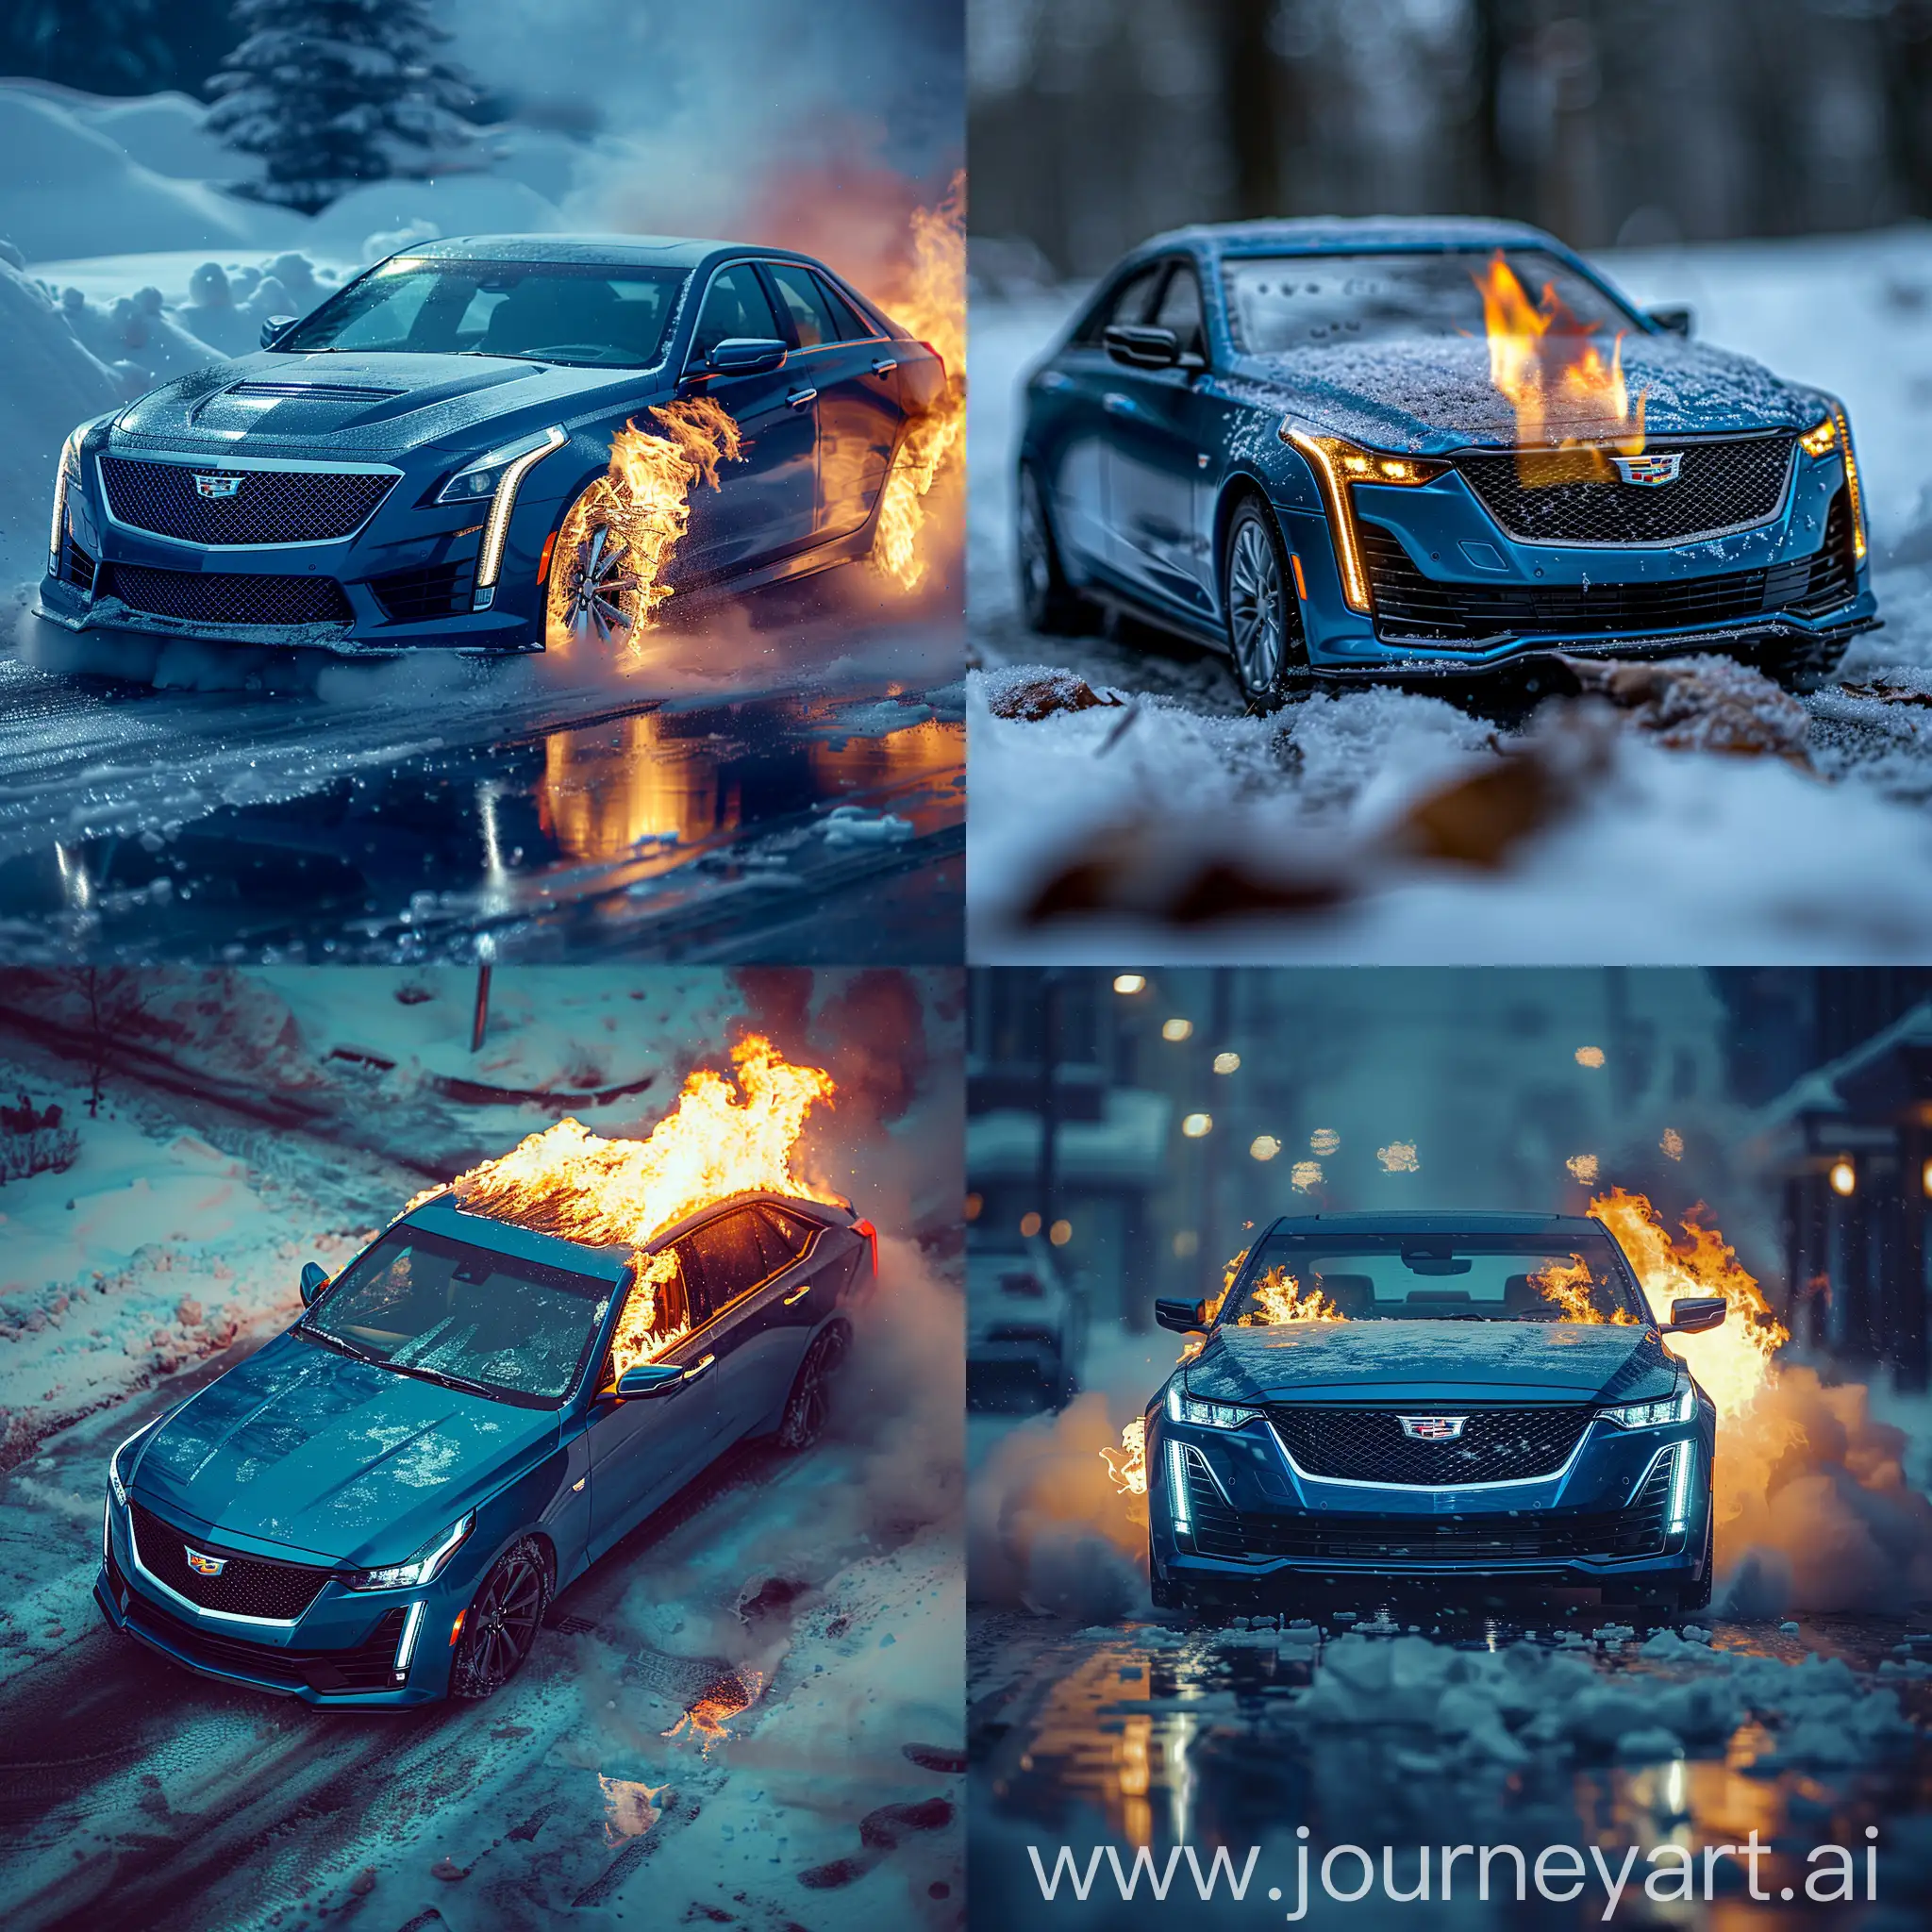 Burning-Blue-Cadillac-CT5-Snowy-Scene-with-Oblique-Angle-Photography